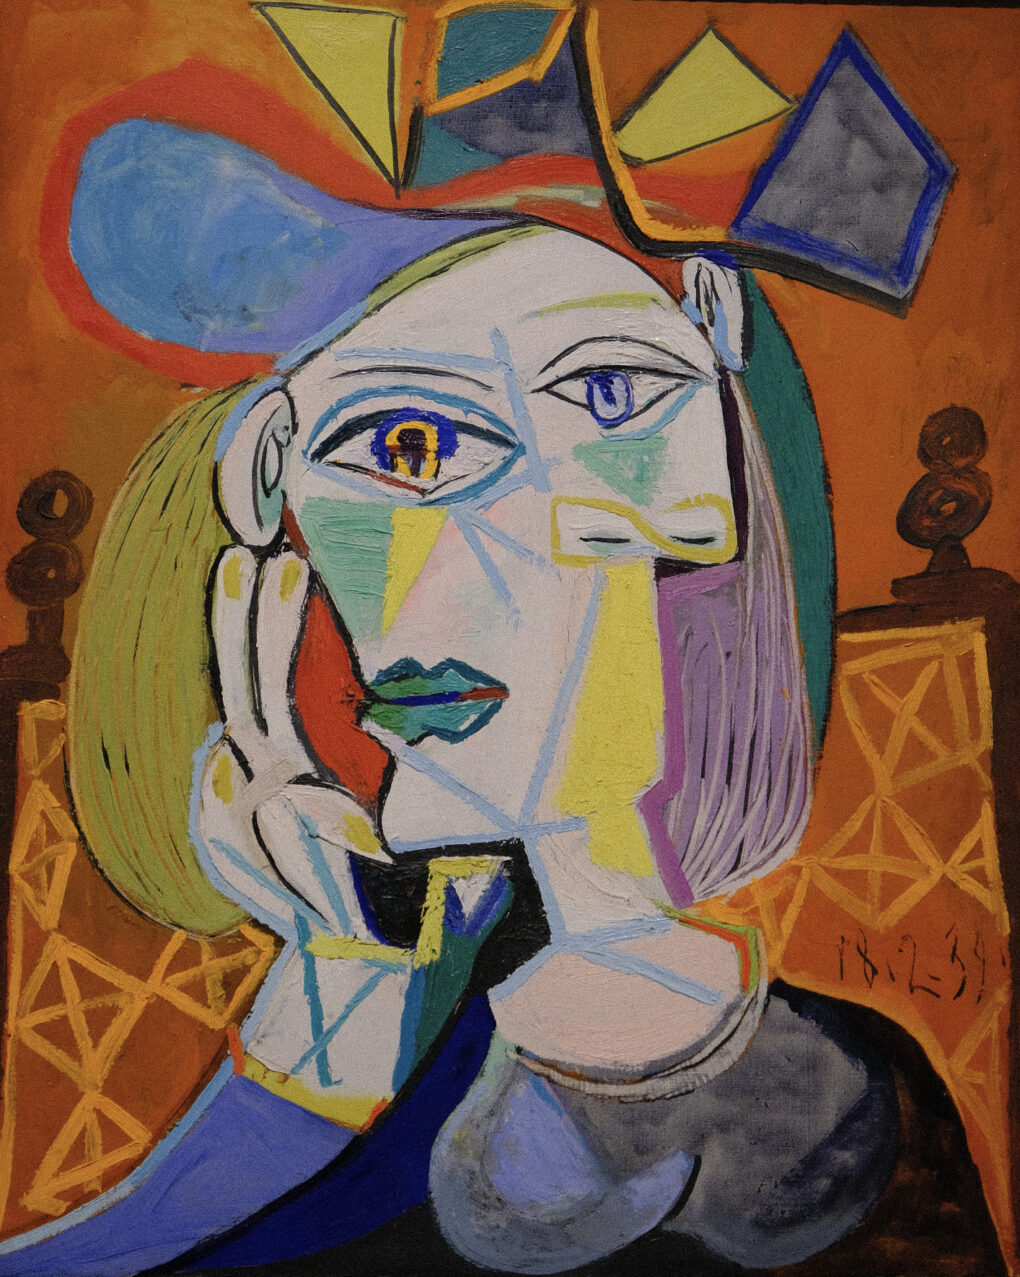 PICASSO AND HIS TIME   パブロ・ピカソ　多色の帽子を被った女の頭部